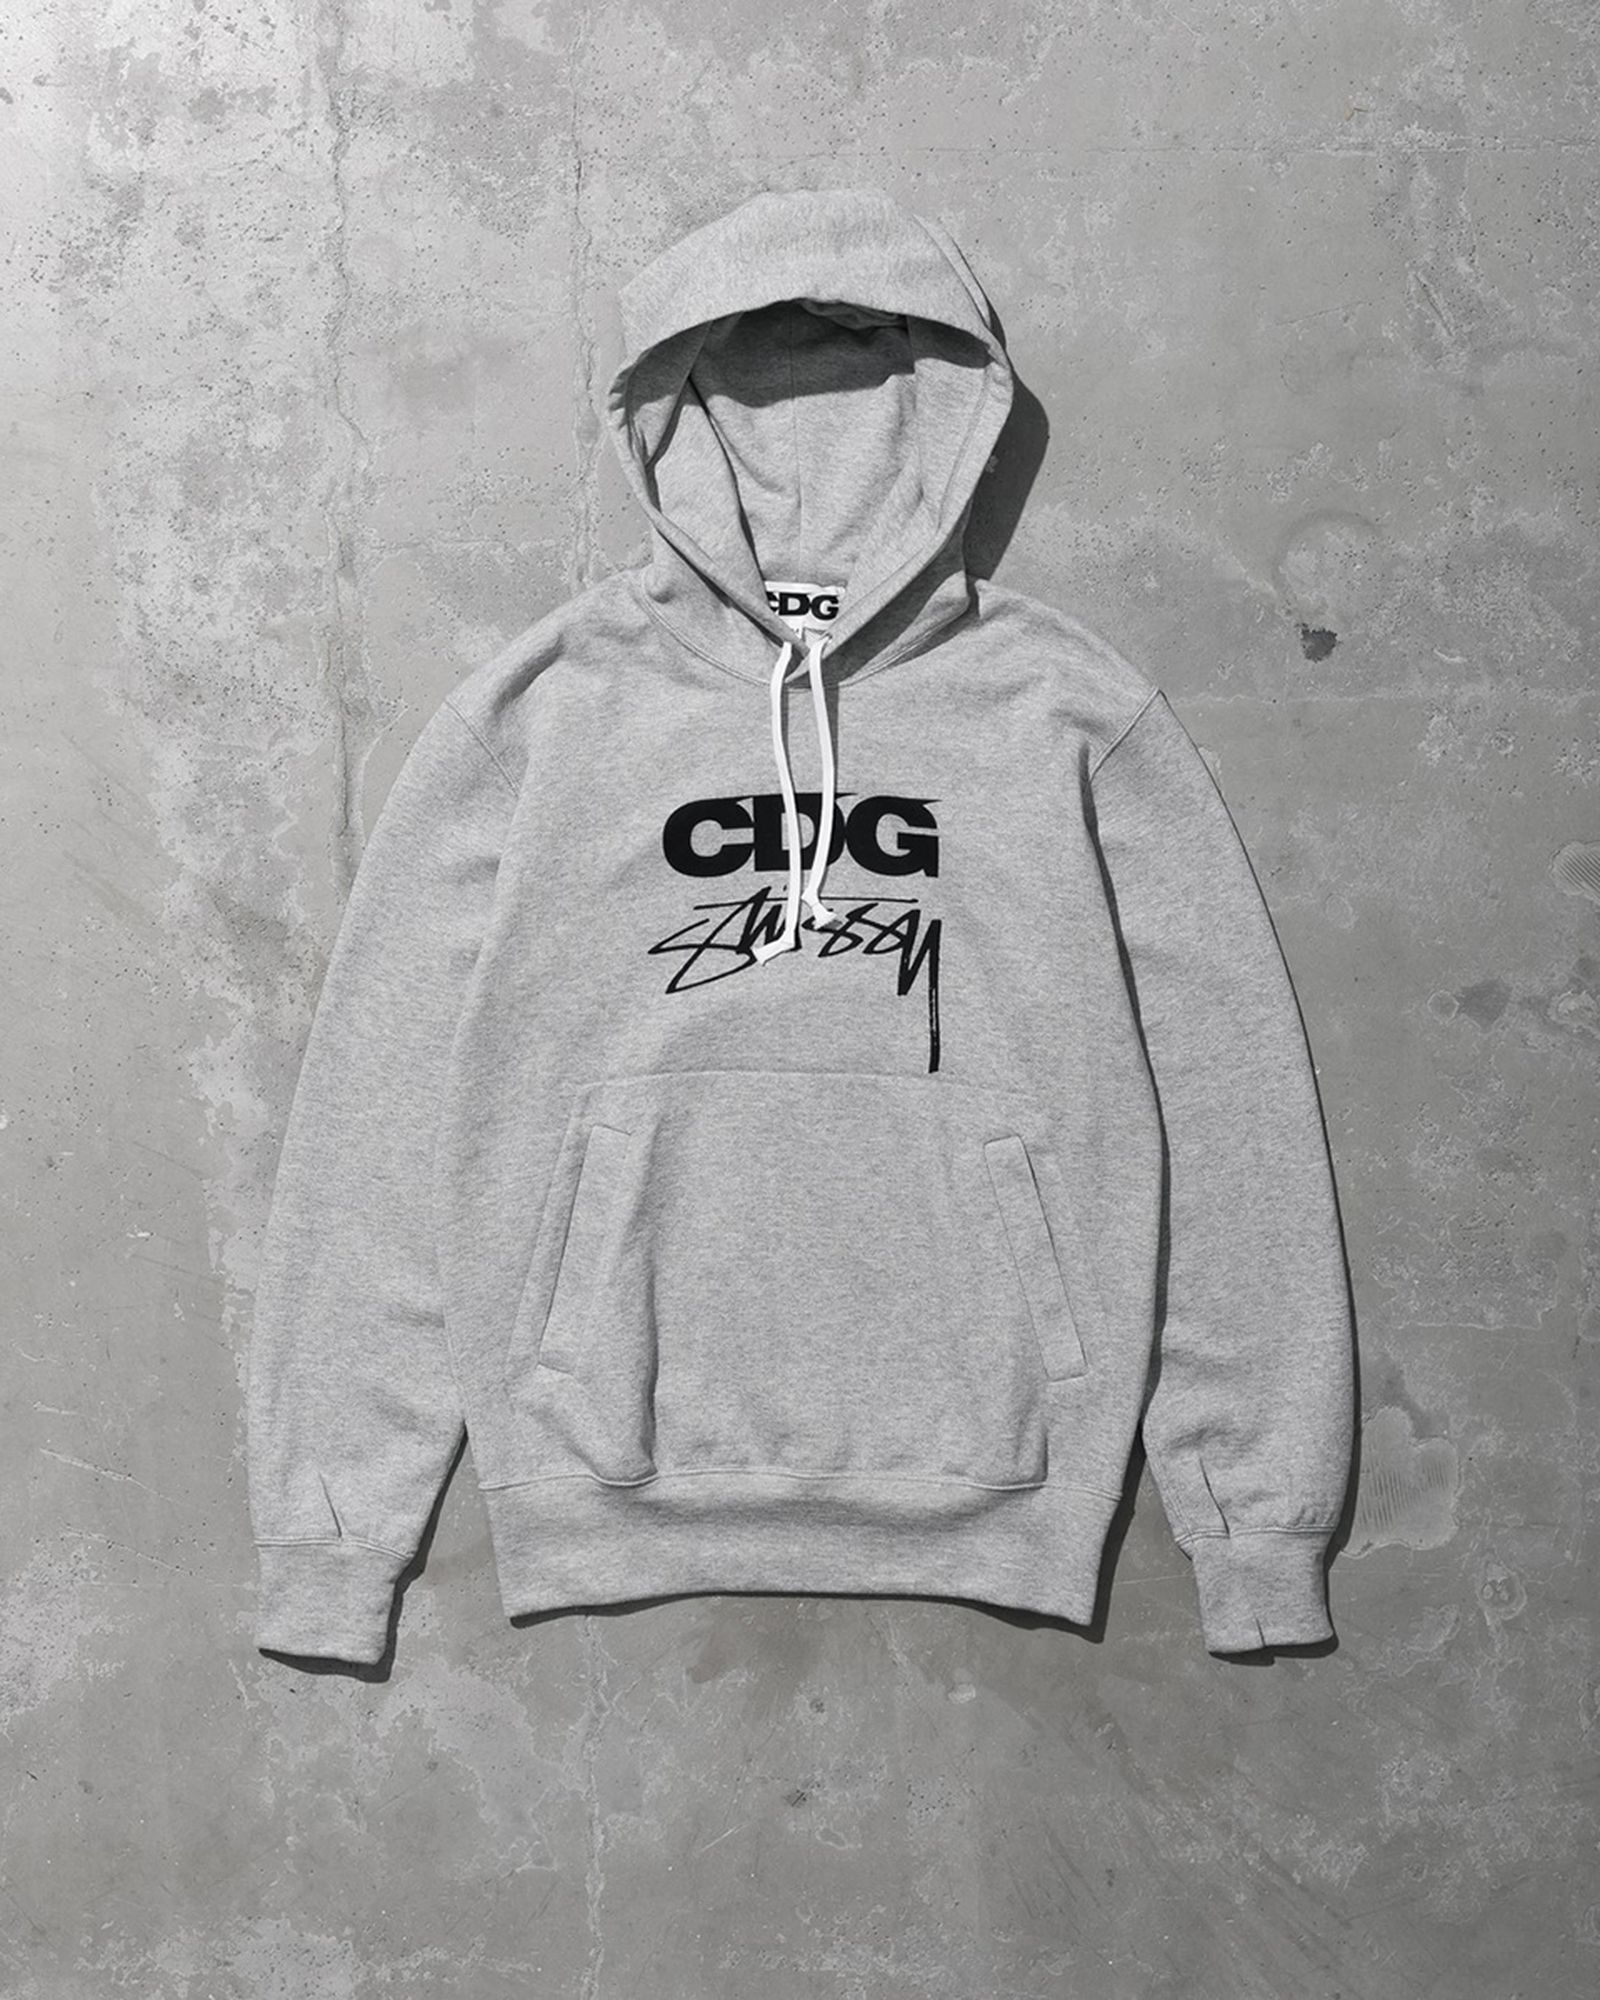 Stüssy x CDG FW21 Collaboration: Release Date, Info